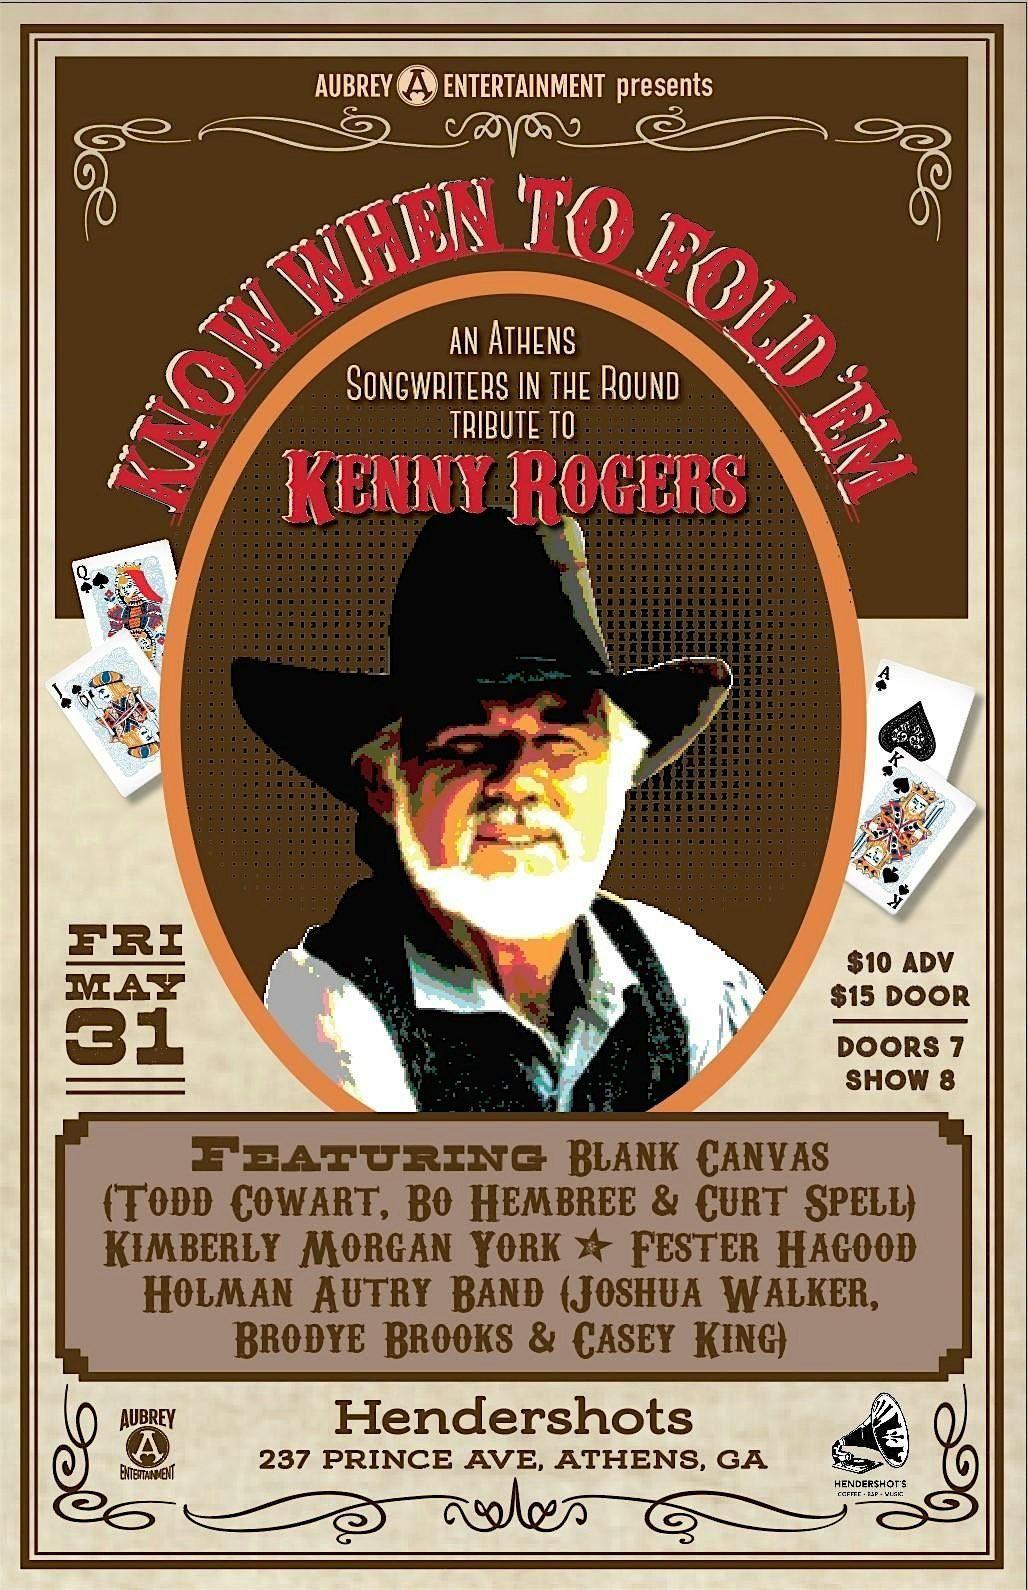 Know When To Fold 'Em: An Allstar Athens Songwriter tribute to KENNY ROGERS